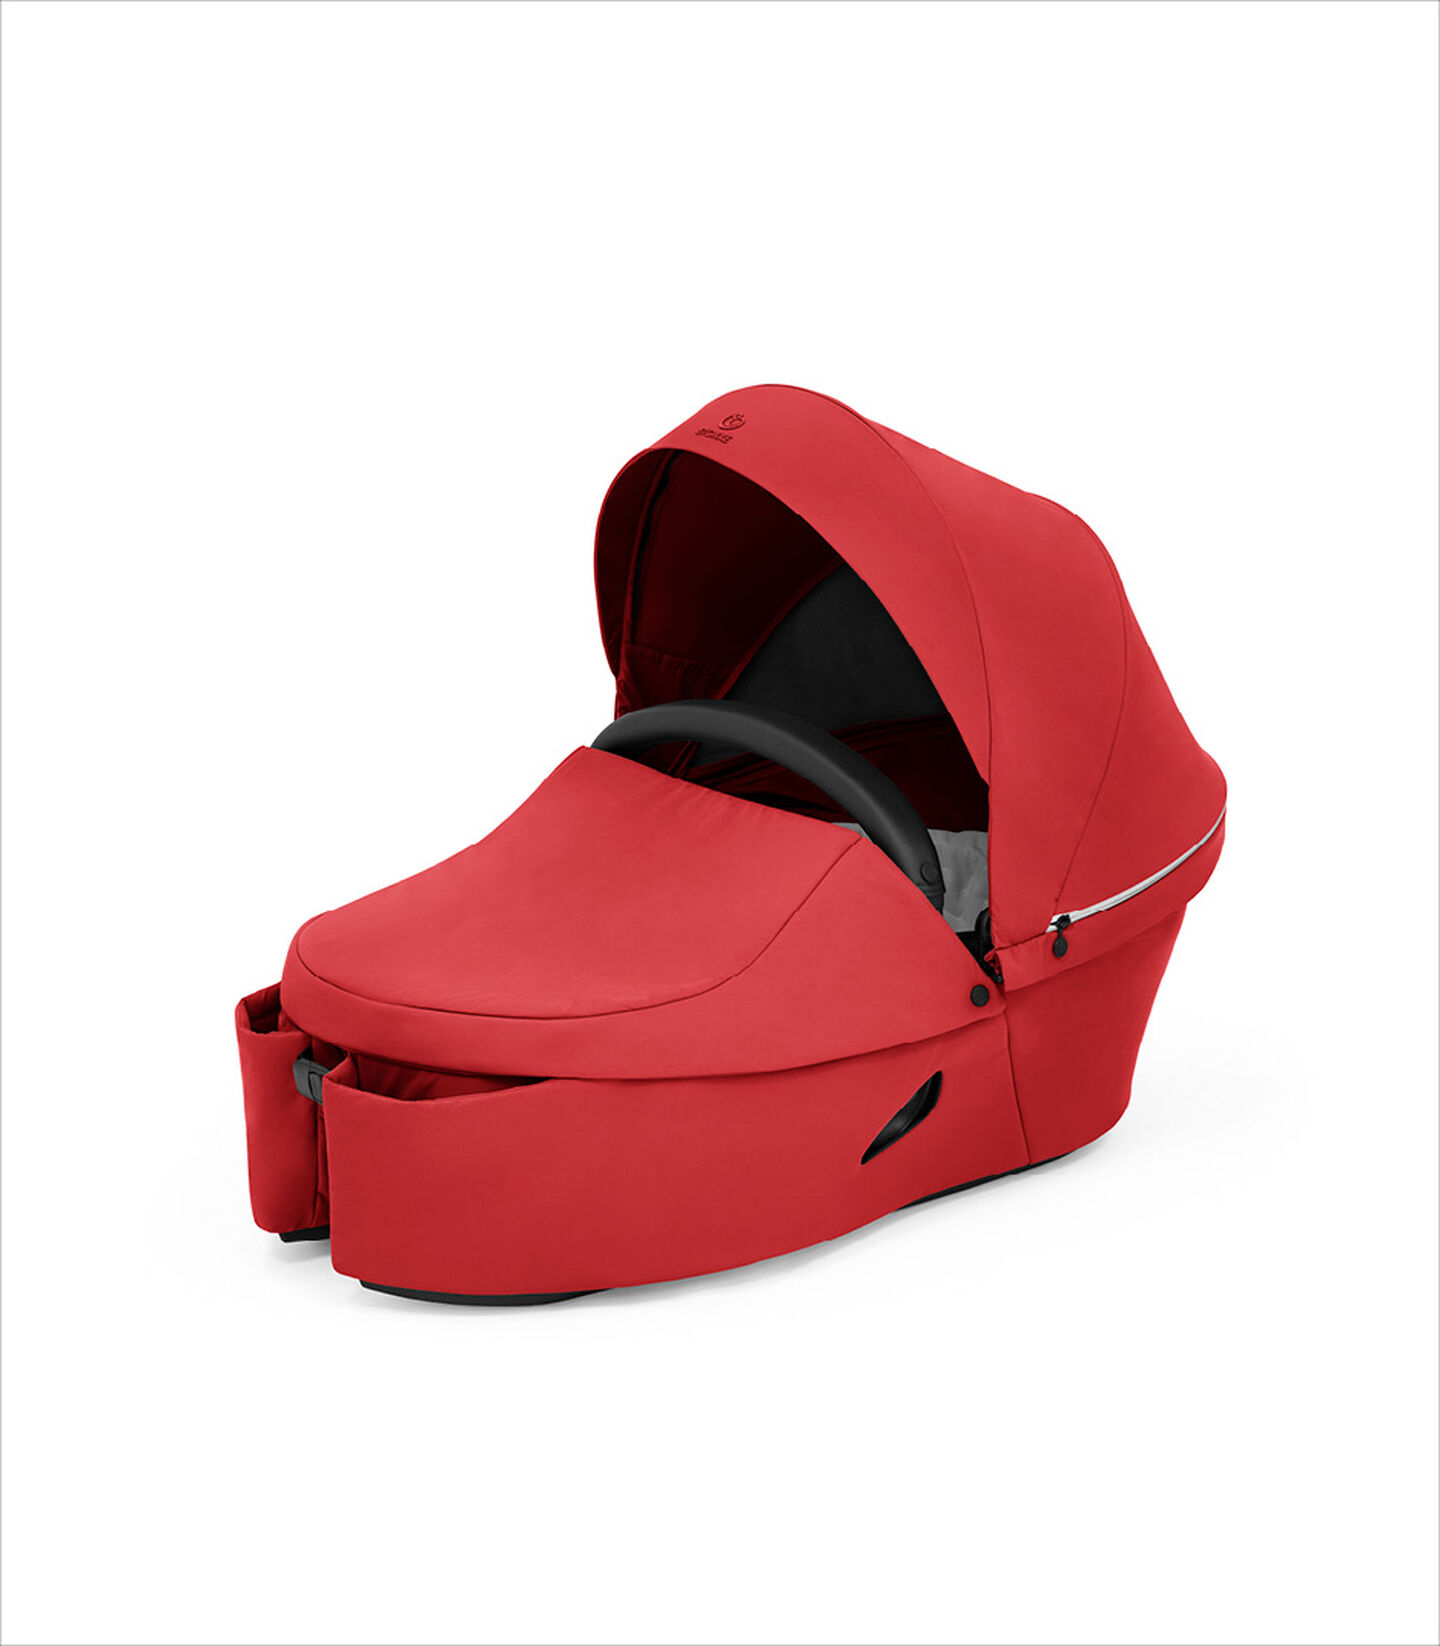 Stokke® Xplory® X-liggdel Ruby Red, Ruby Red, mainview view 6